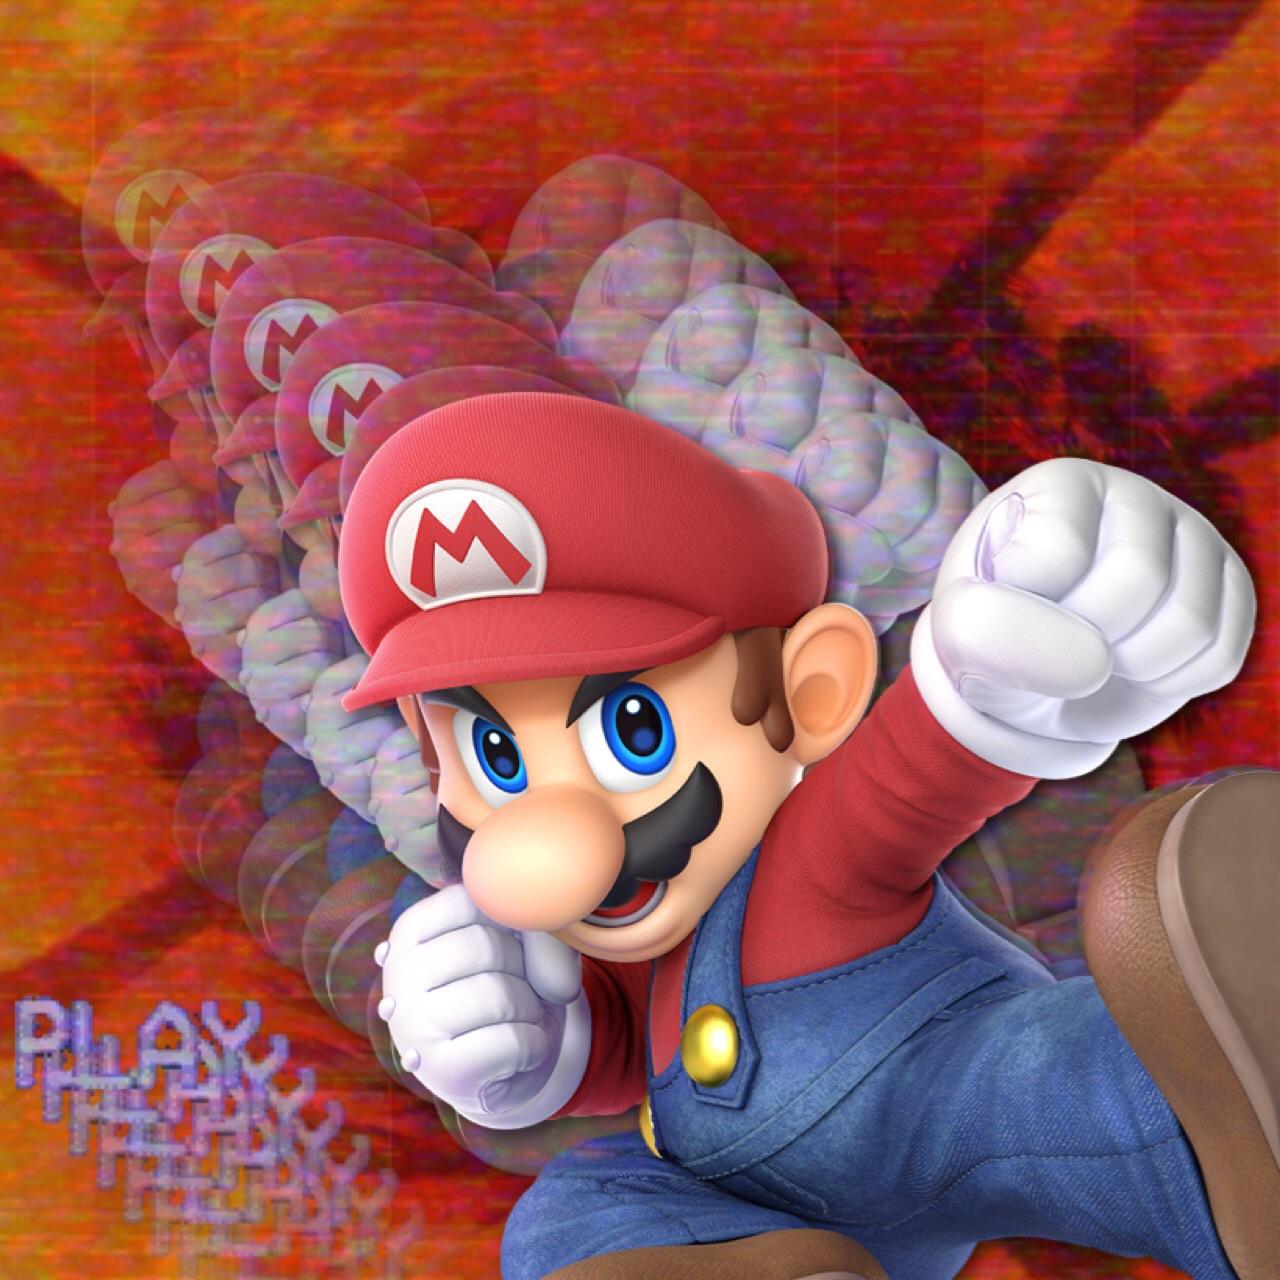 Made a little vaporwavy aesthetic edit thing for Mario's Ult render. Thinking of doing one for every character